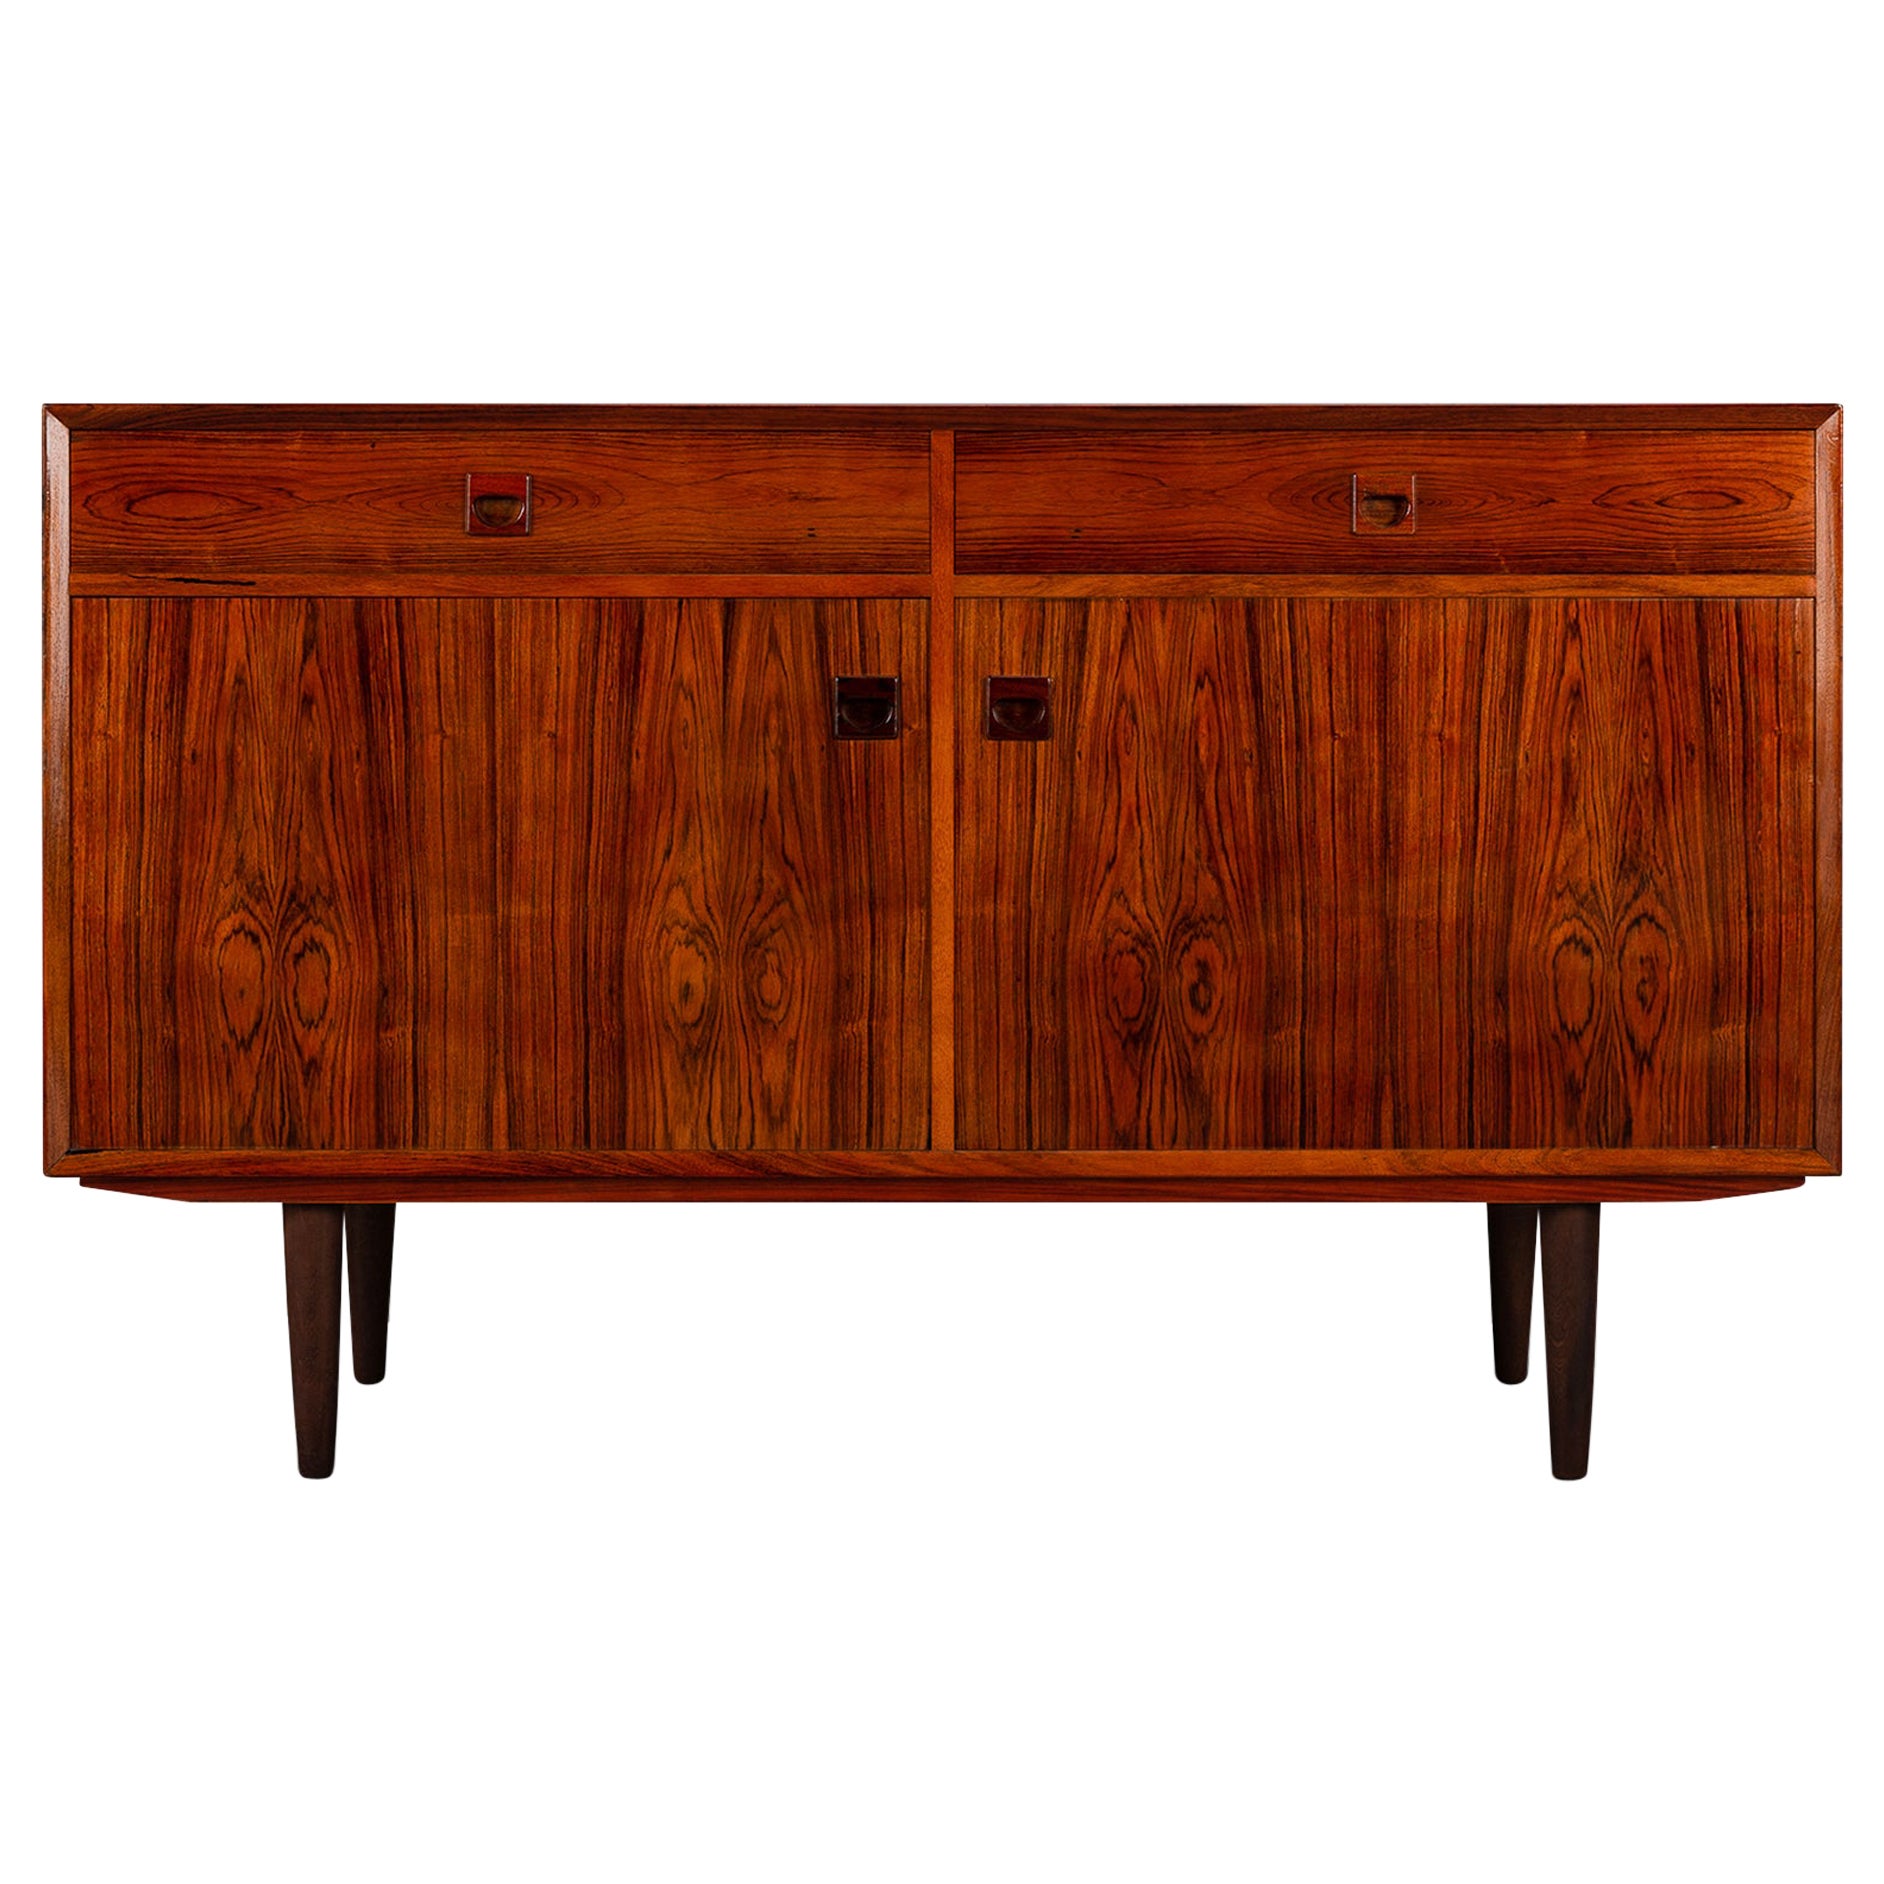 Midcentury Danish Rosewood Sideboard by E. Brouer for Brouer Møbelfabrik, 1960s